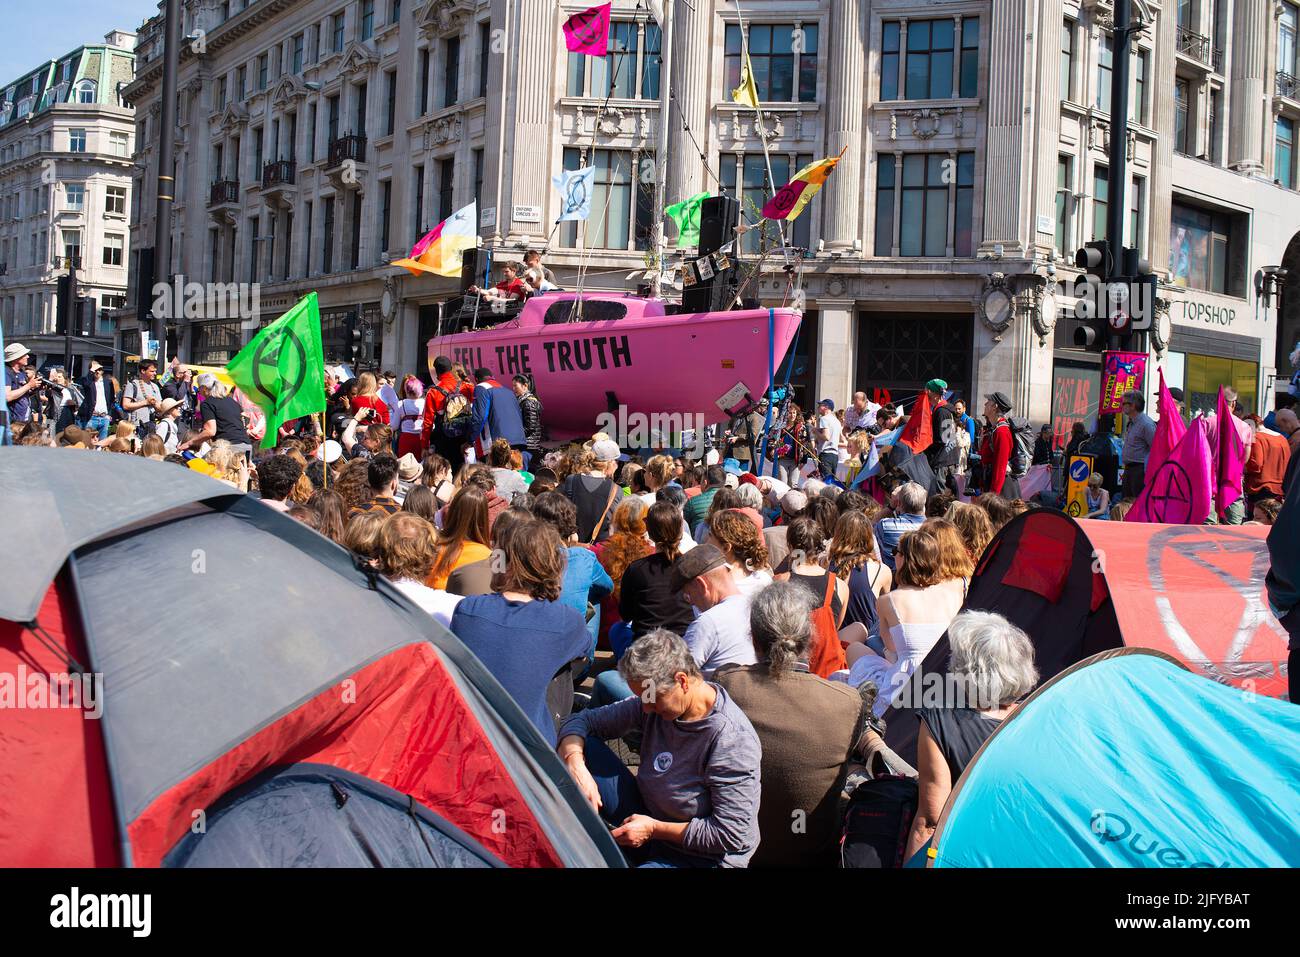 Climate change protesters at the Extinction Rebellion demonstration, central London, in protest of world climate breakdown and ecological collapse. Stock Photo